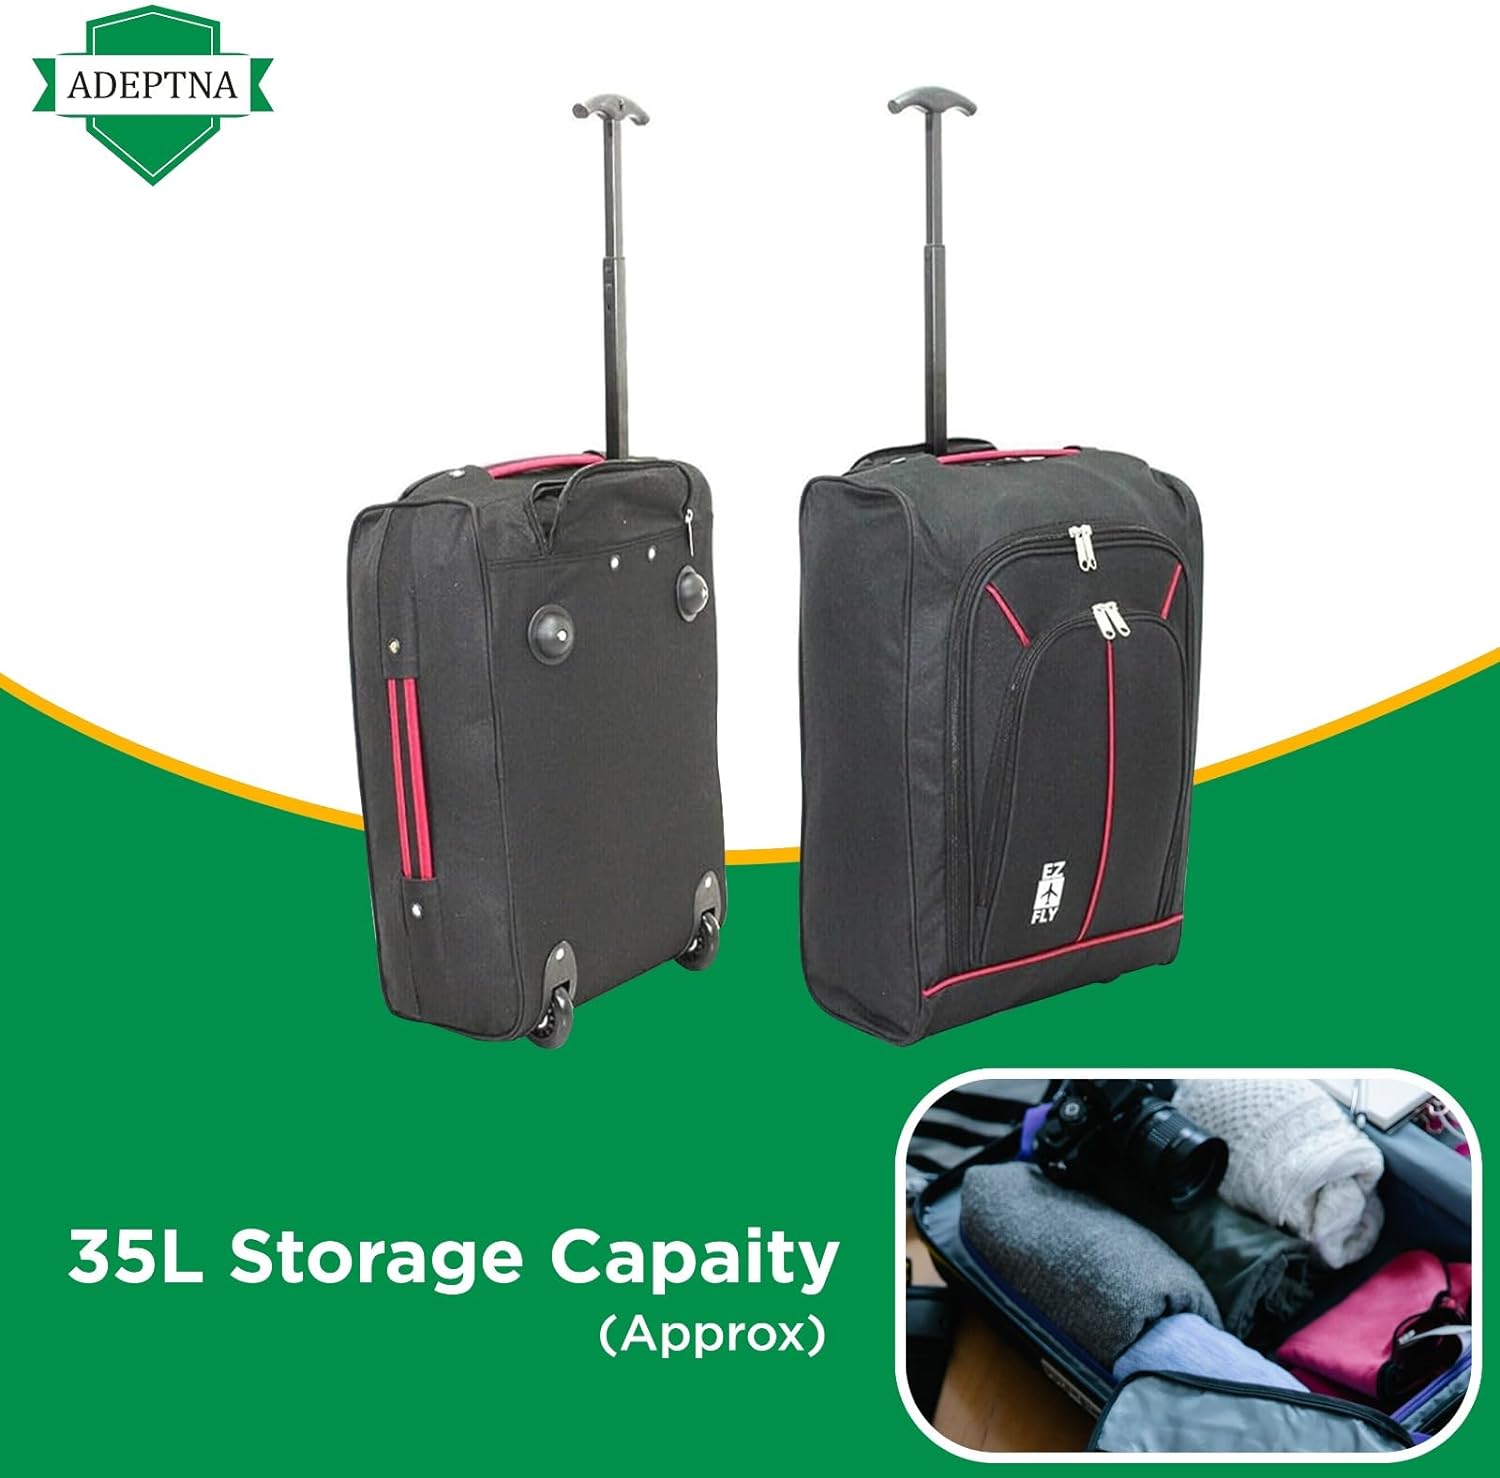 ADEPTNA Cabin Trolley Bag with Wheels Travelling Luggage Travel Carrier Lightweight Multiple Pocket Airline Bag Holdall Cabin Size Approved